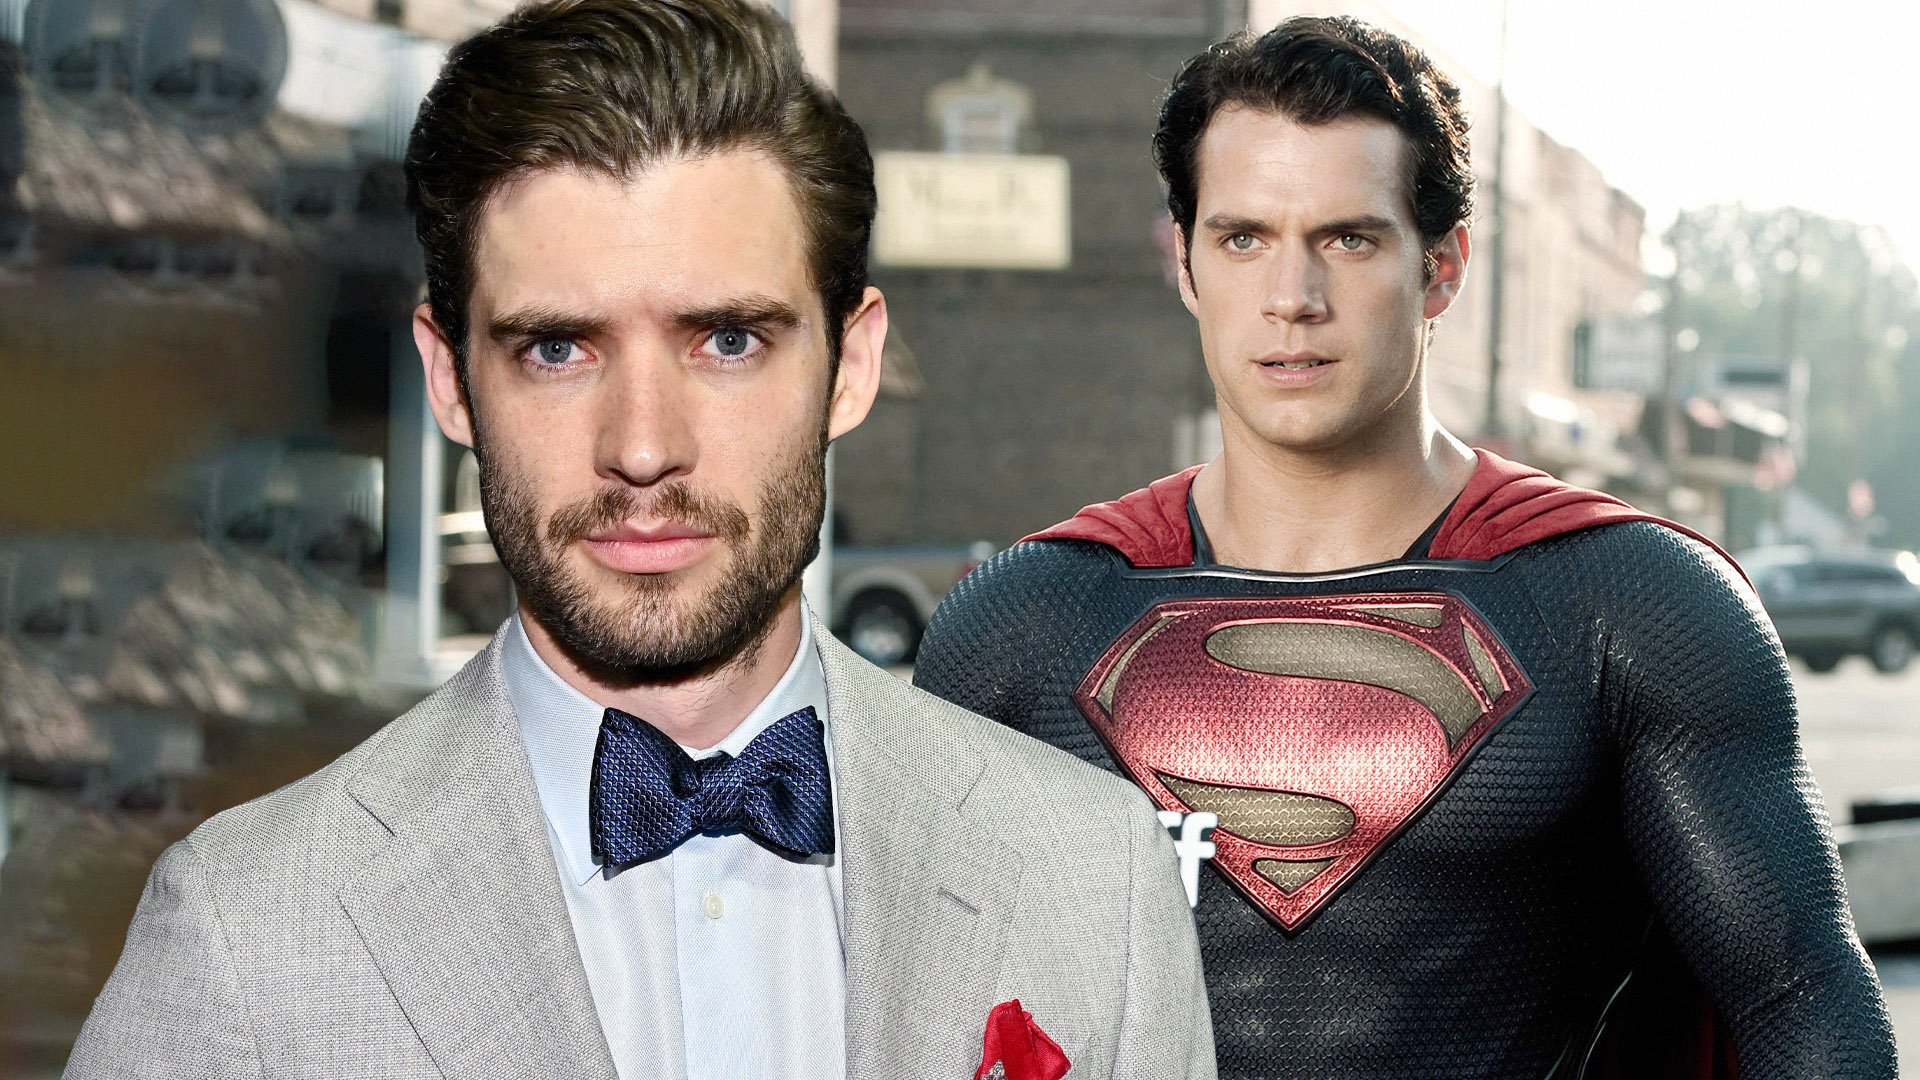 Meet the Next Superman: David Corenswet's Resemblance to Henry Cavill is Uncanny